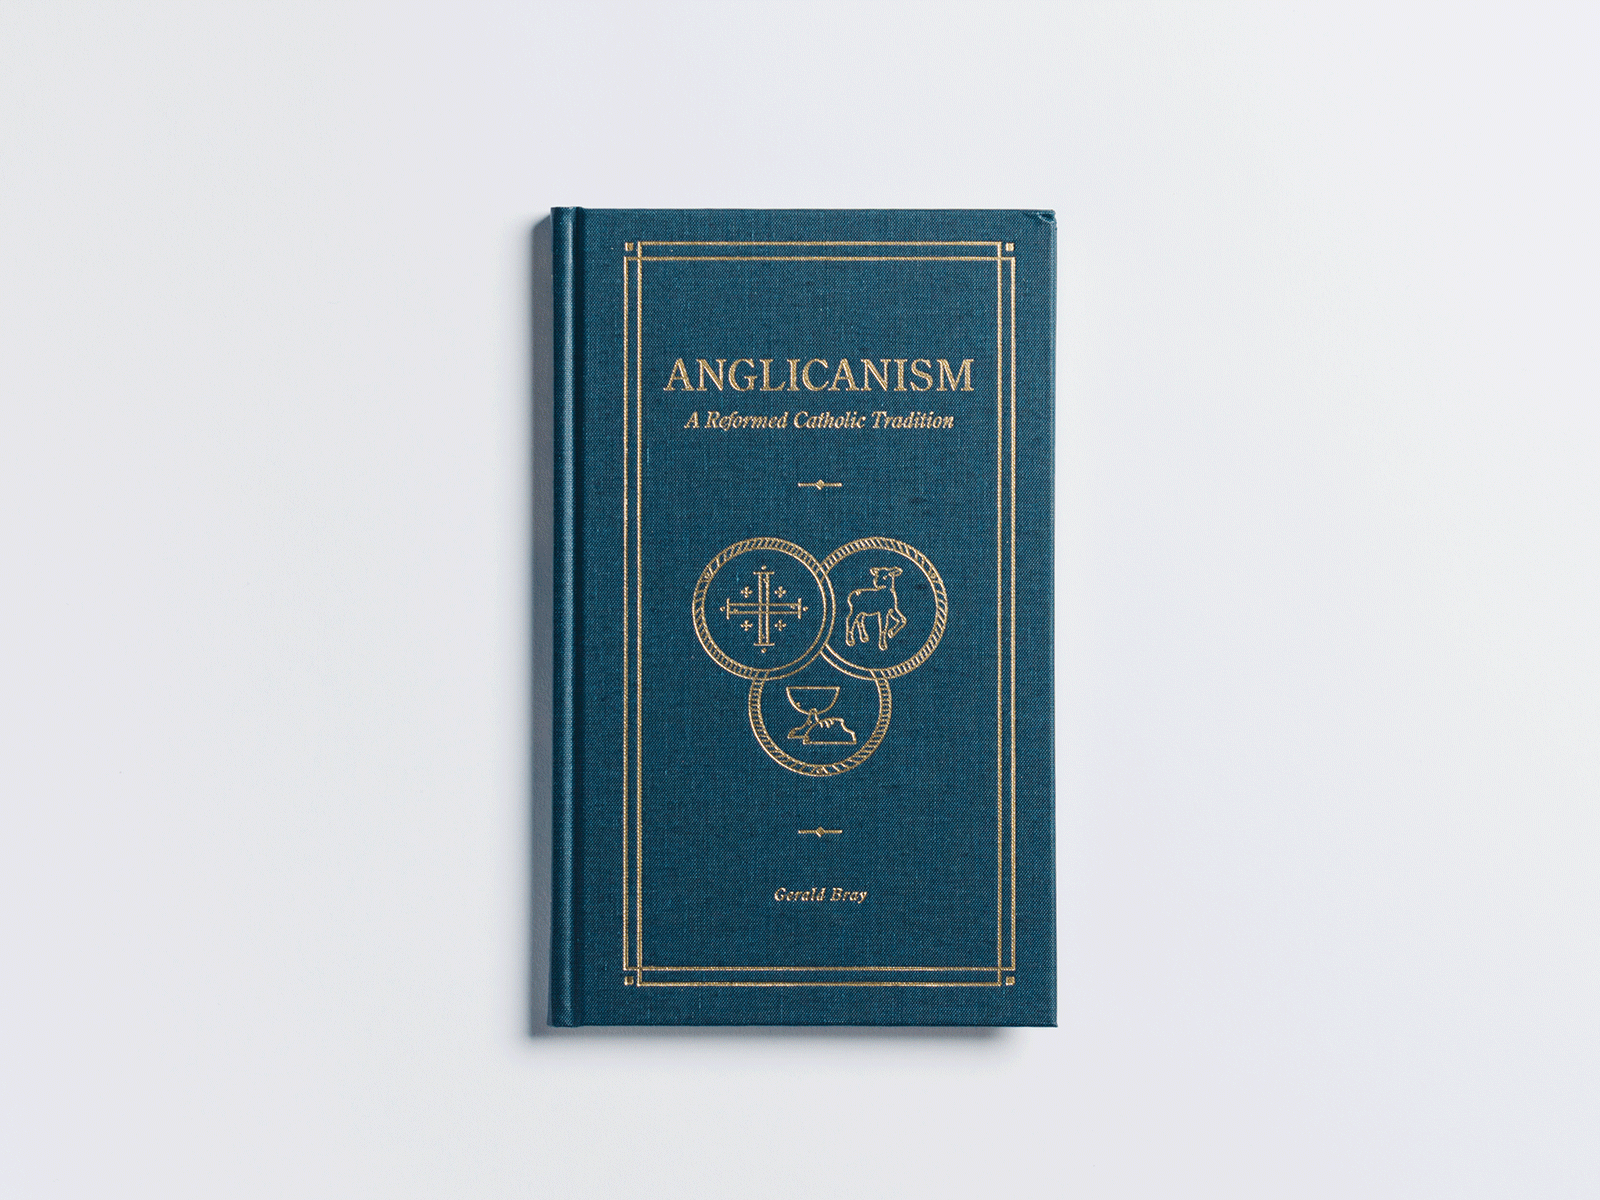 Anglicanism Book anglican anglicanism bible book cover book cover design book design christian design icon illustration jesus print reformed tradition